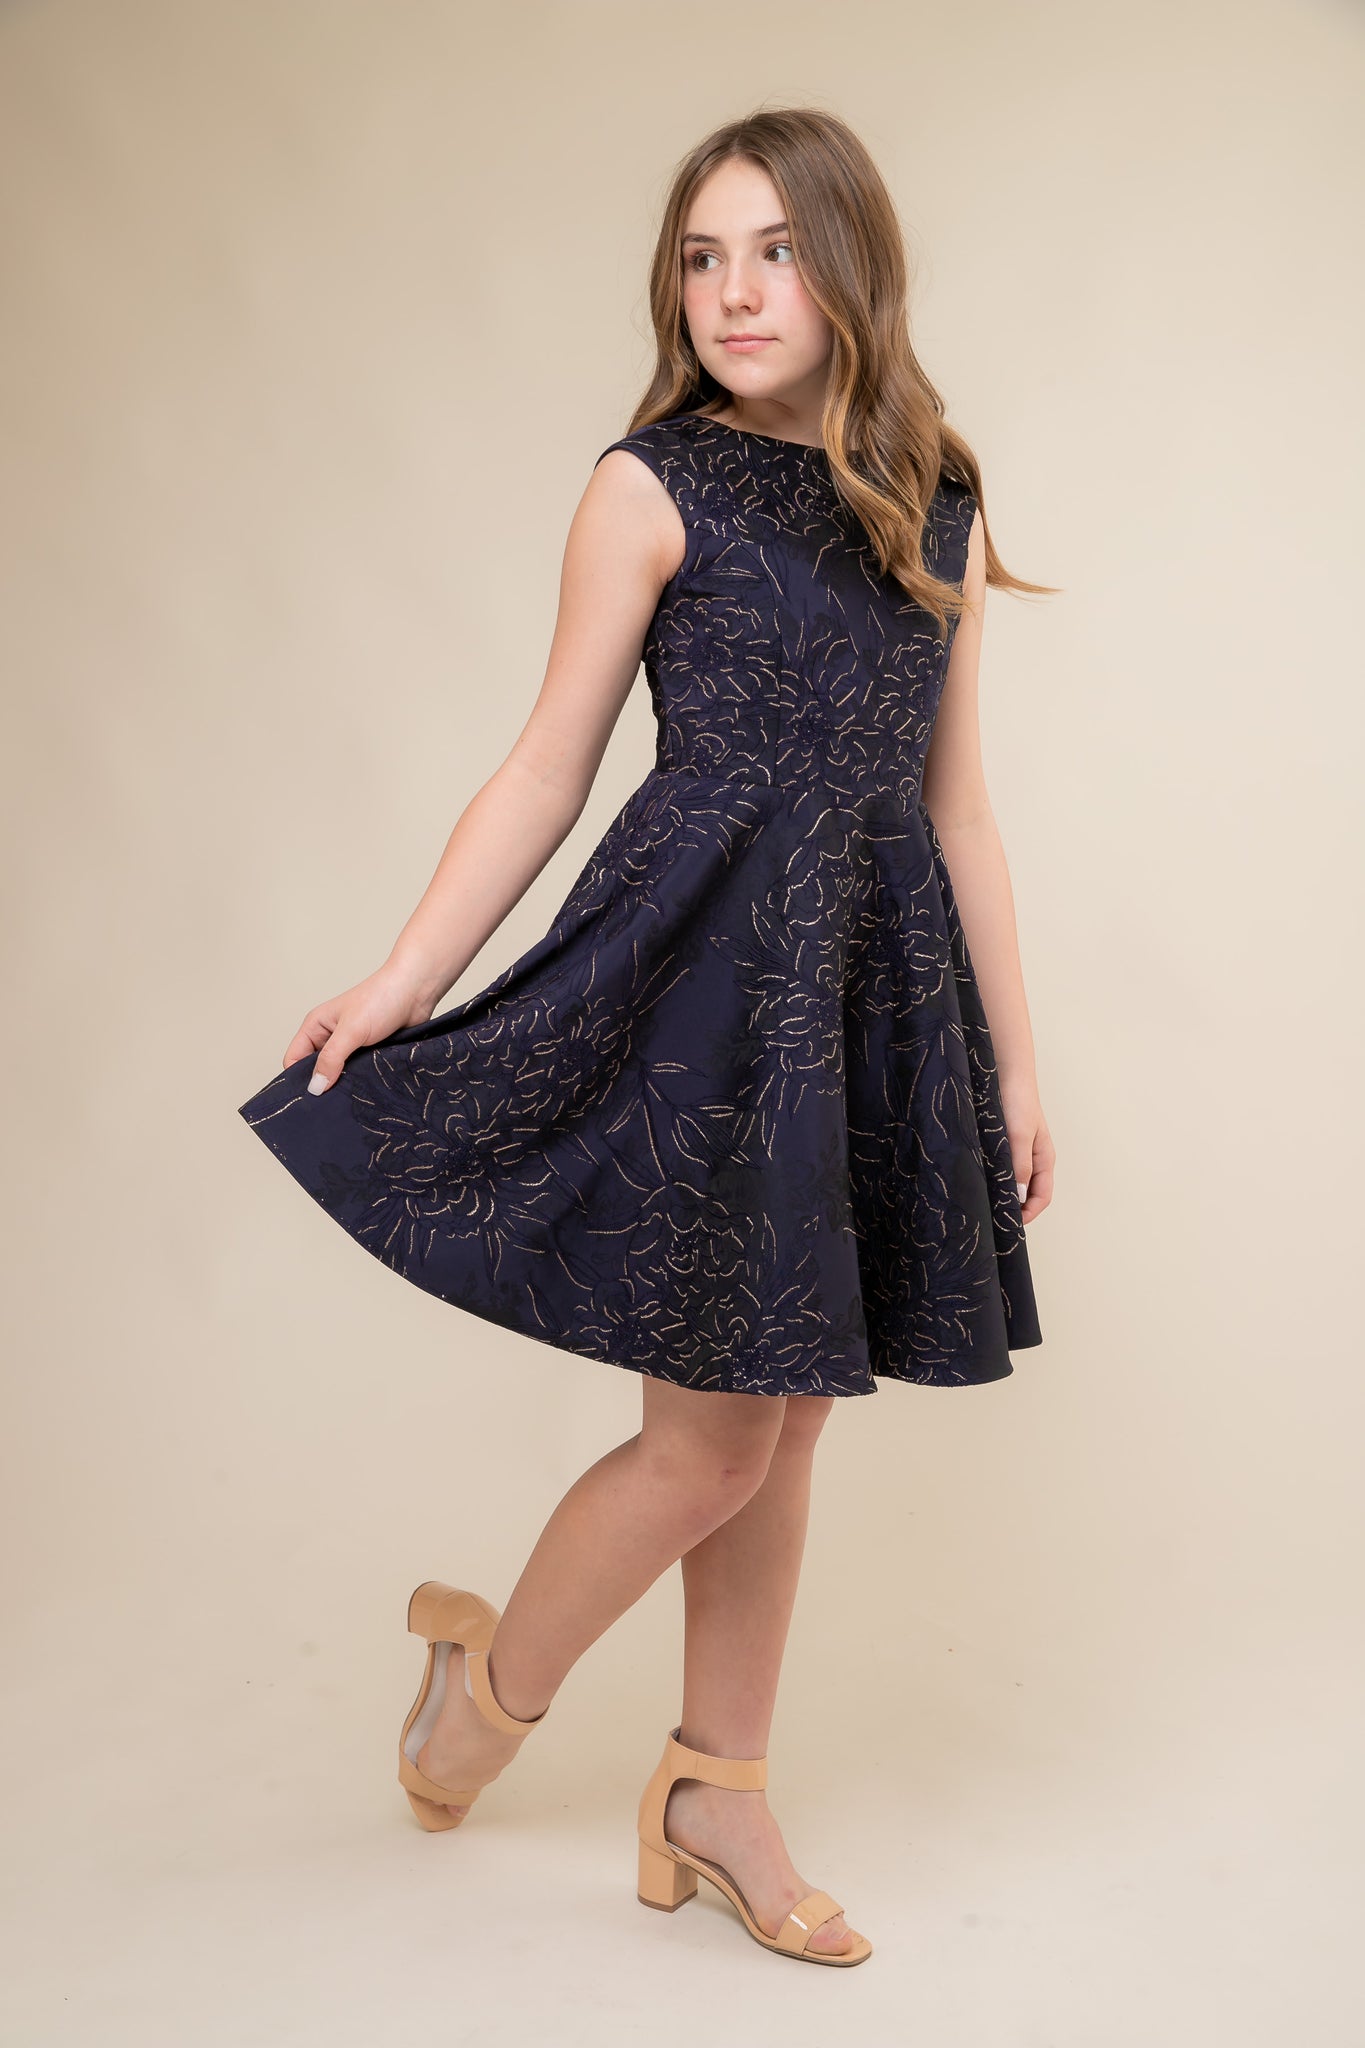 This is an all over jacquard, cap sleeve dress in navy floral with non-stretch material, zipper back, and longer length detailing. This dress is perfect for any religious event like bat mitzvah, cotillion or church service.